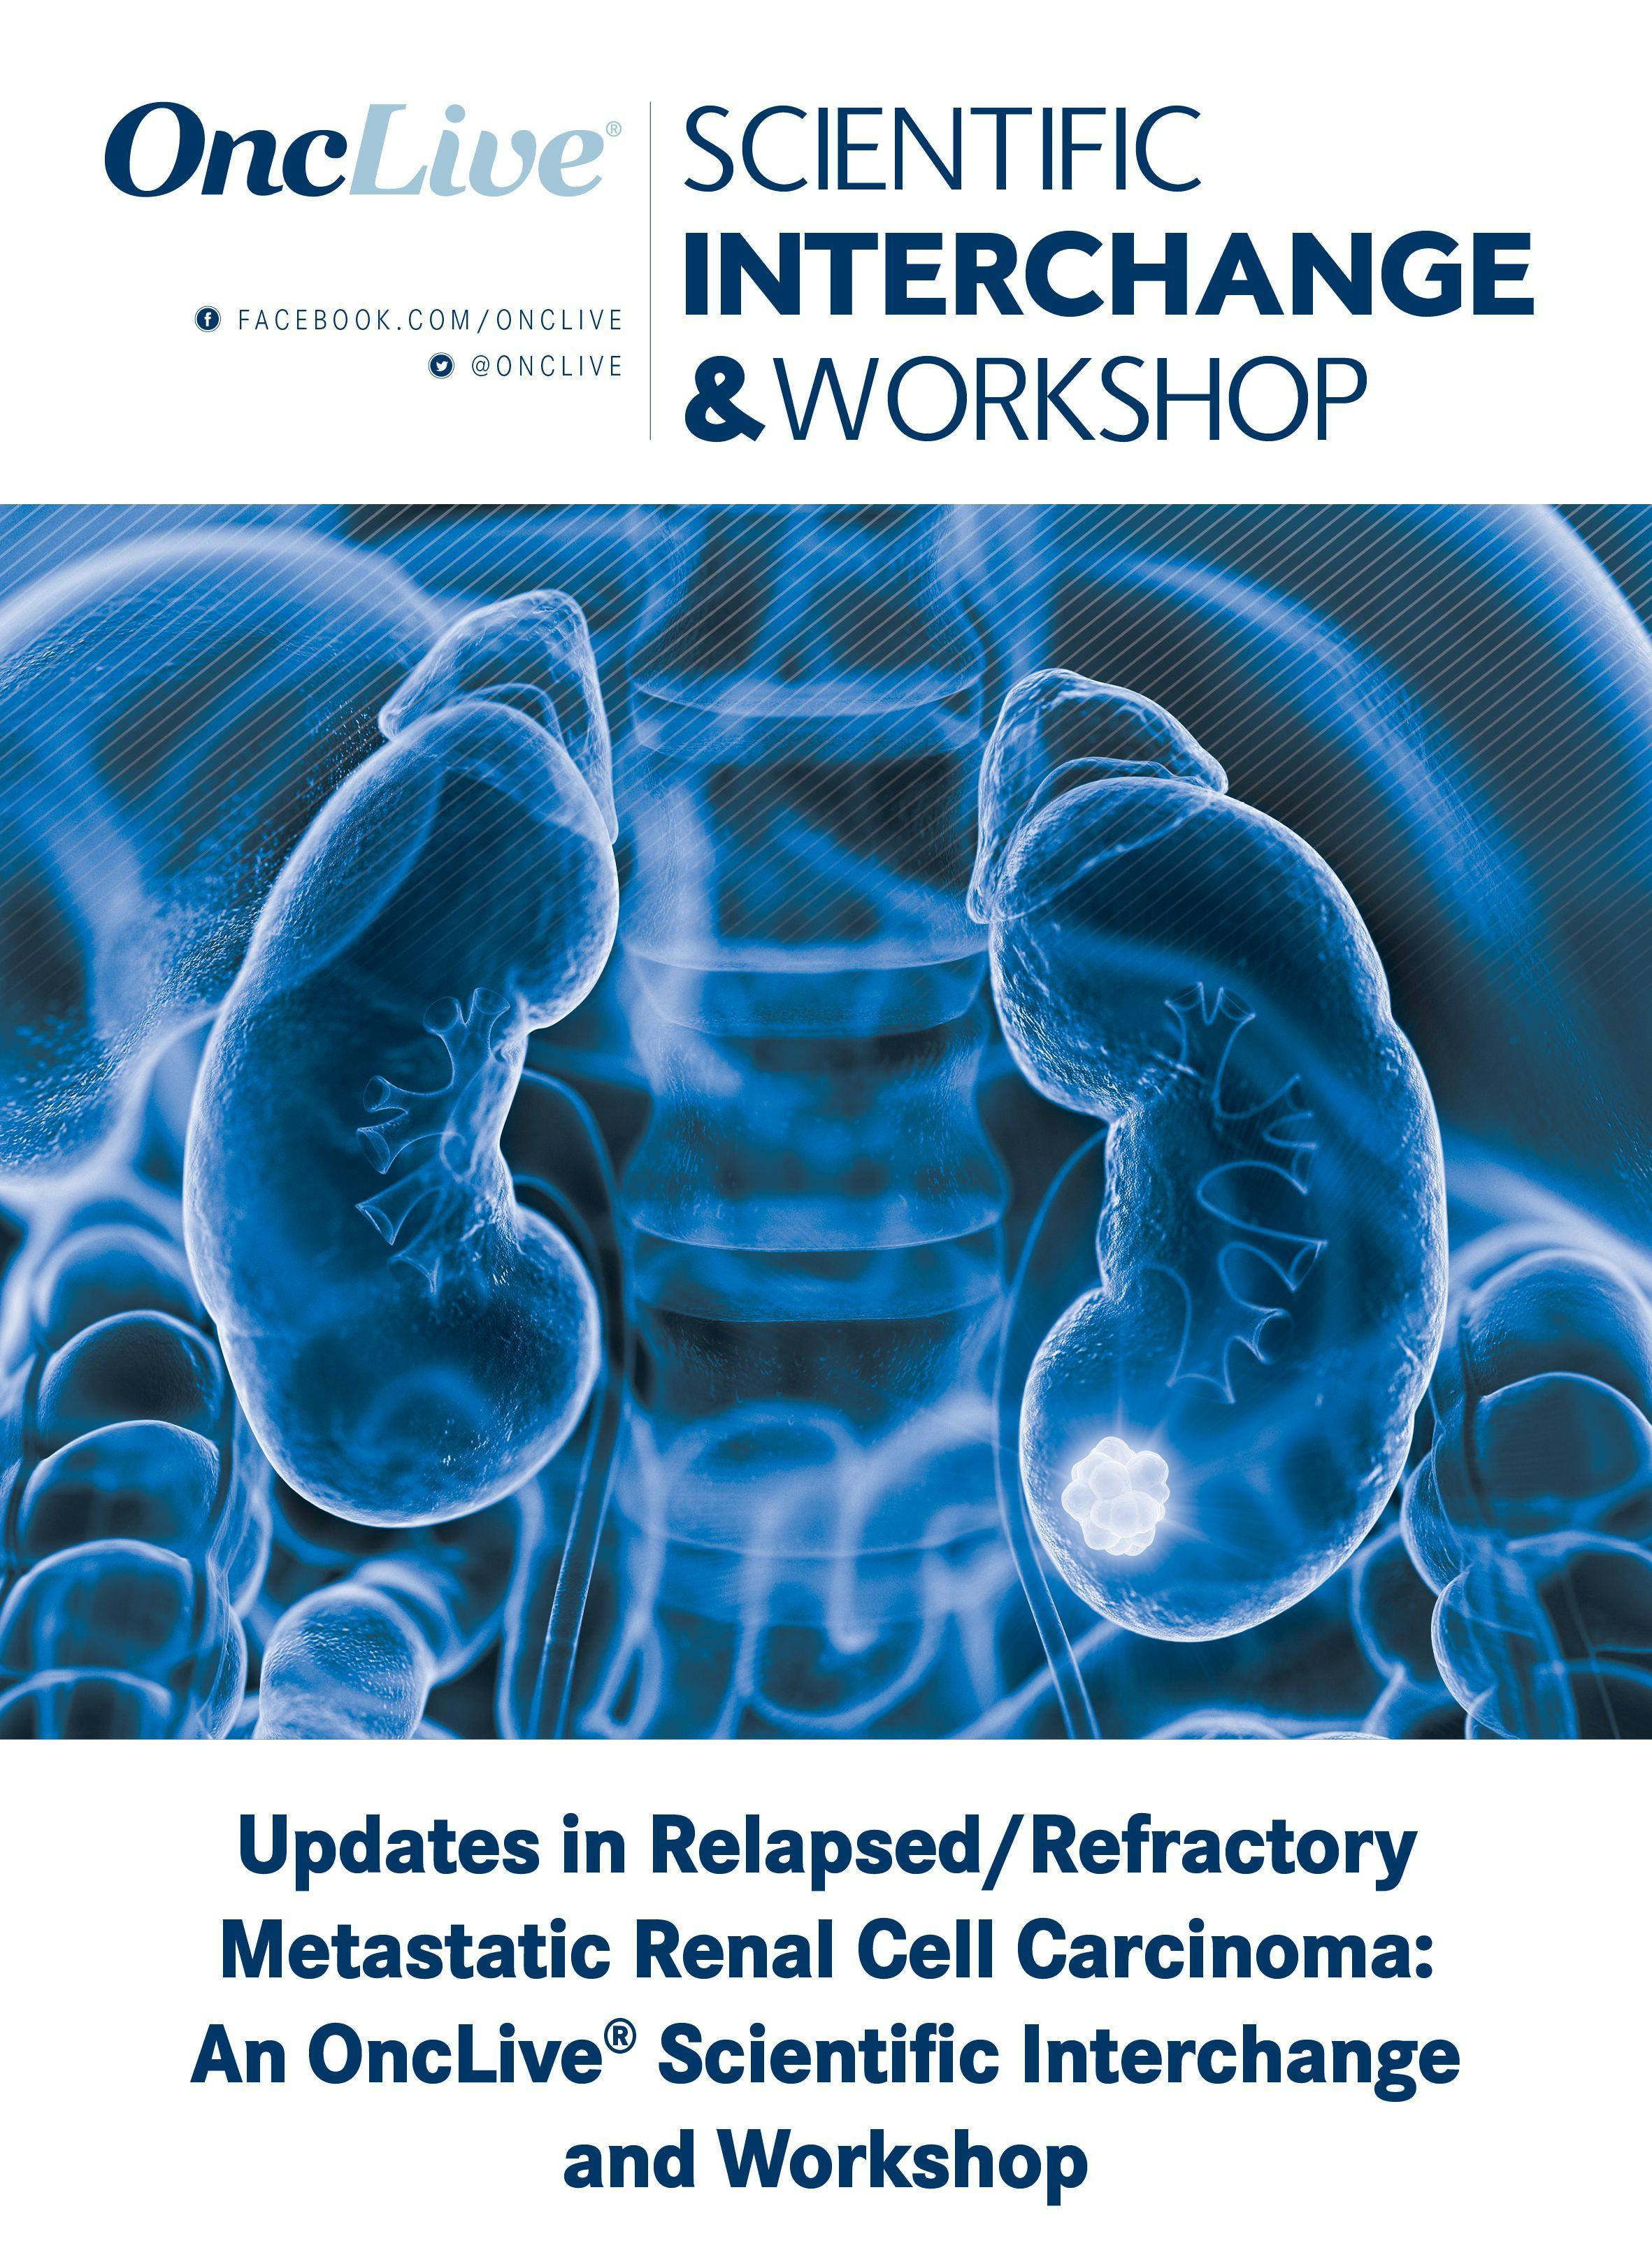 Updates in Relapsed/Refractory Metastatic Renal Cell Carcinoma: An OncLive® Scientific Interchange and Workshop